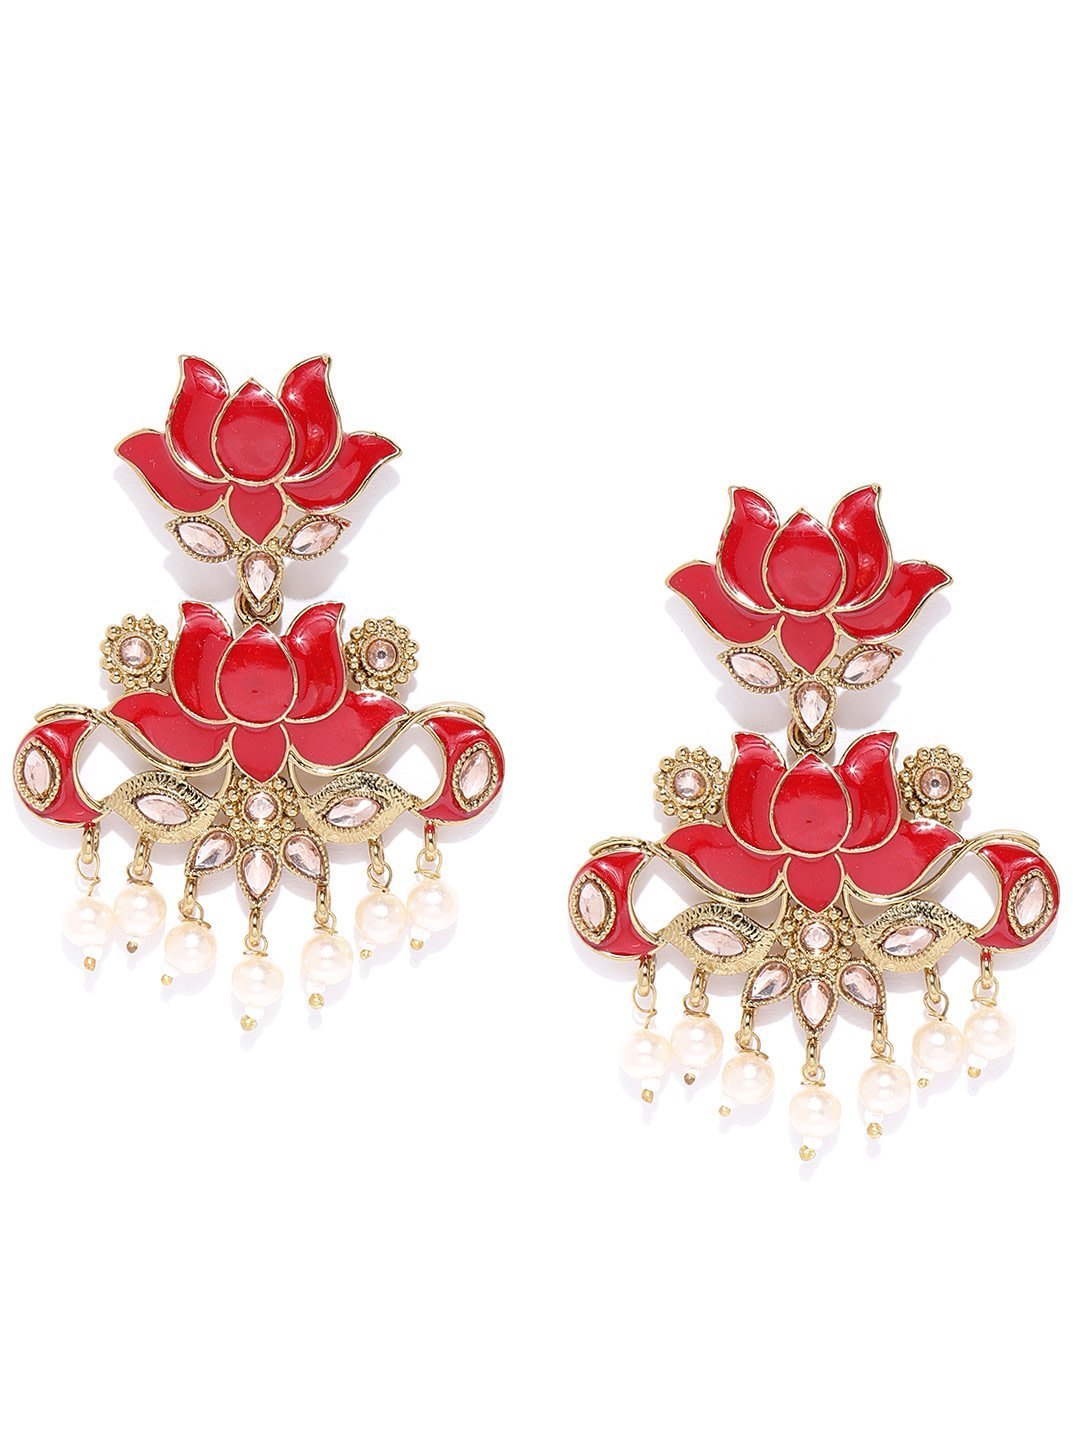 Women's Gold-Plated Stones Studded, Lotus Patterned Meenakari Drop Earring in Red Color with Pearls Drop - Priyaasi